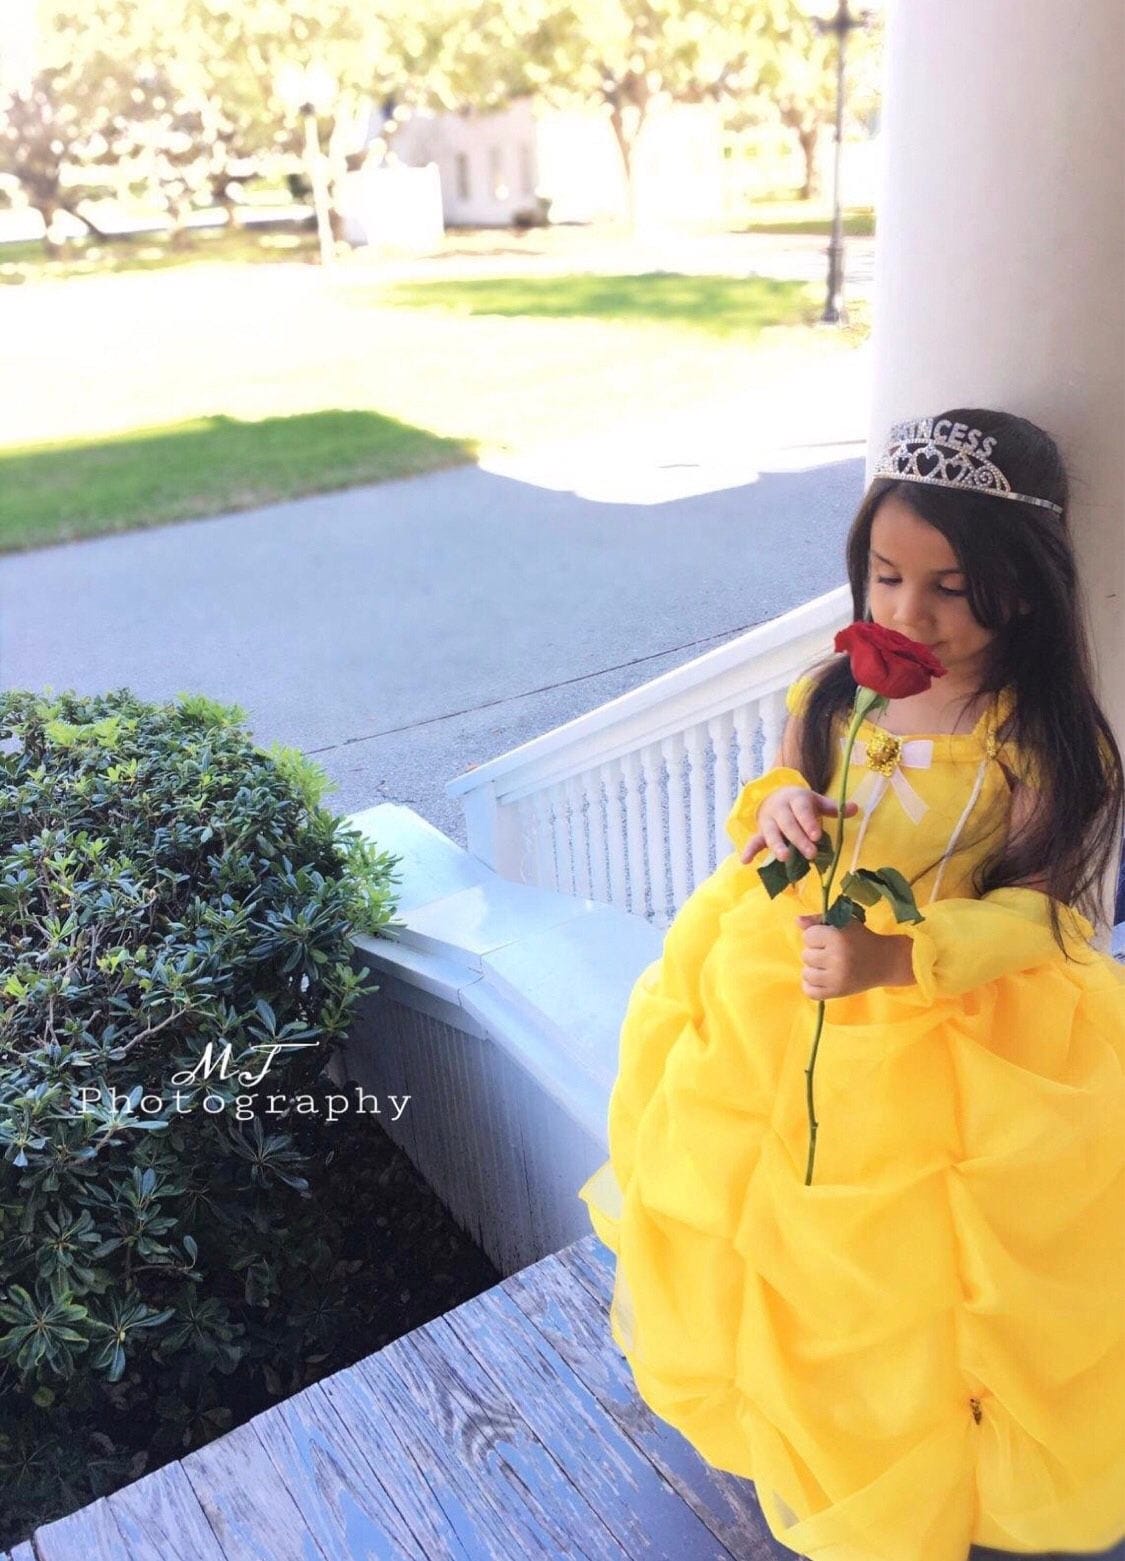 Beauty and the Beast Cosplay Princess Belle Costume Yellow Dress | eBay